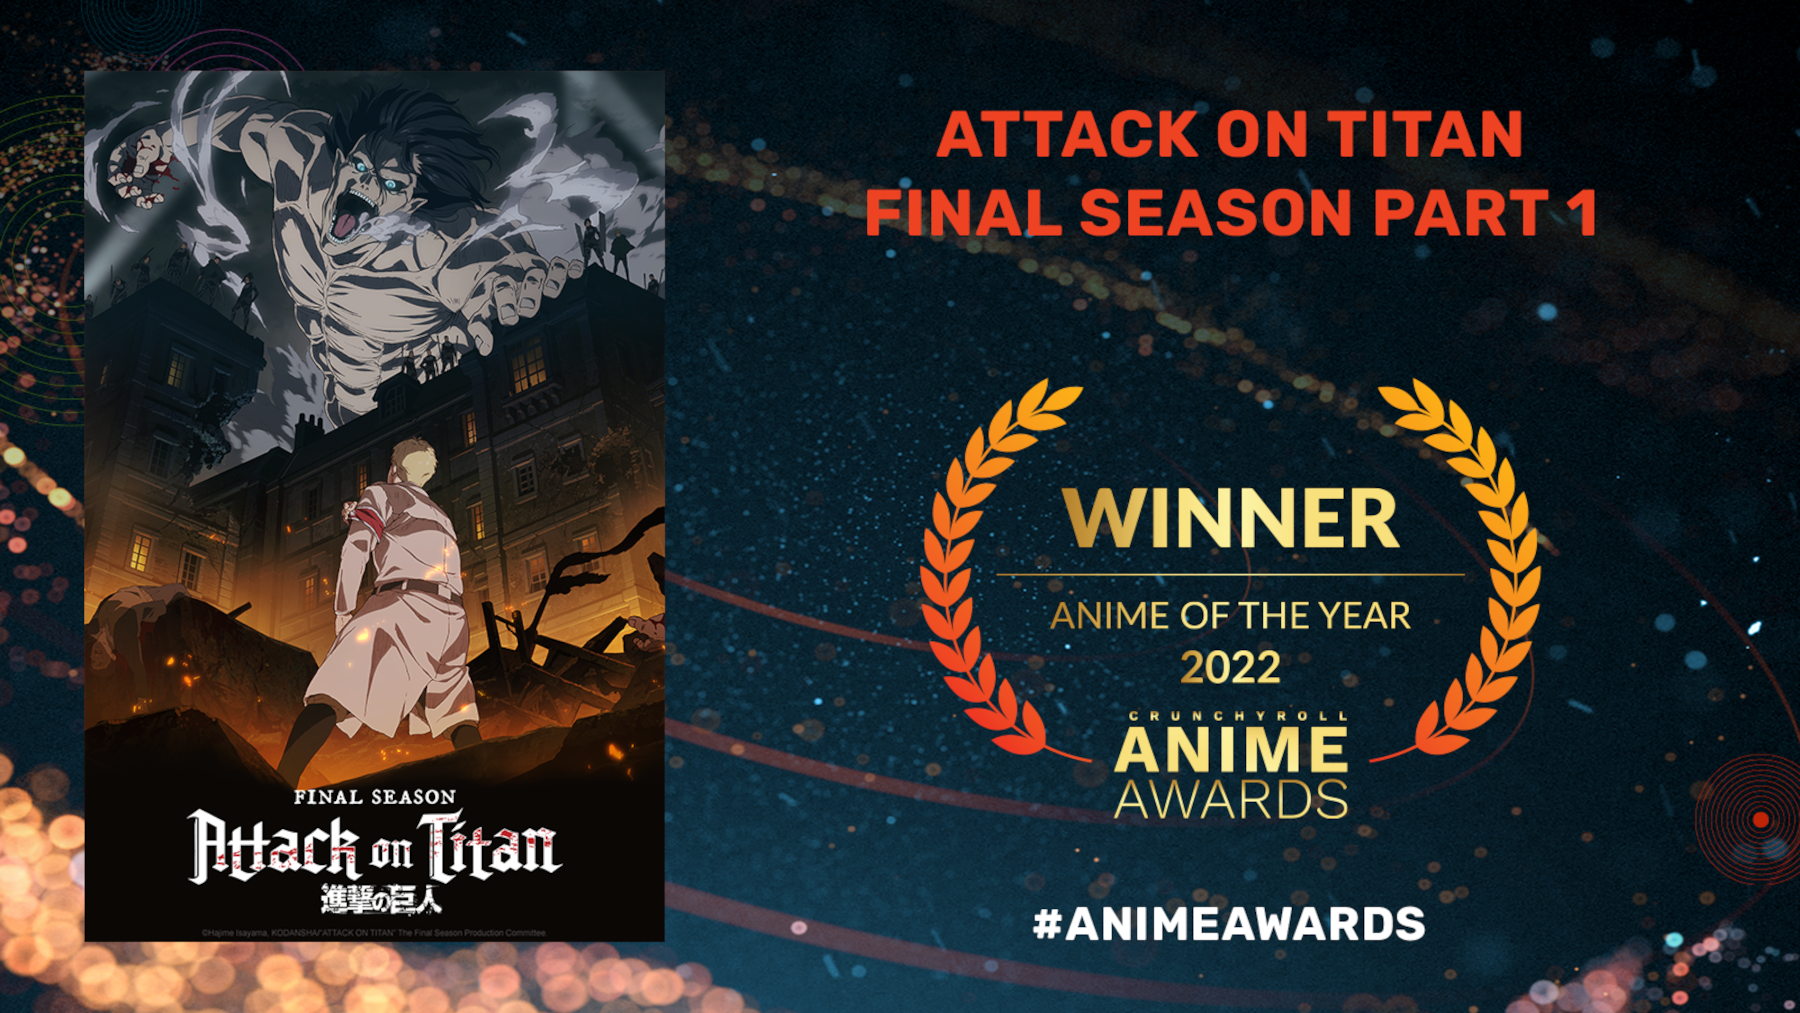 Crunchyroll Names 'Attack on Titan' Anime of the Year in 2022